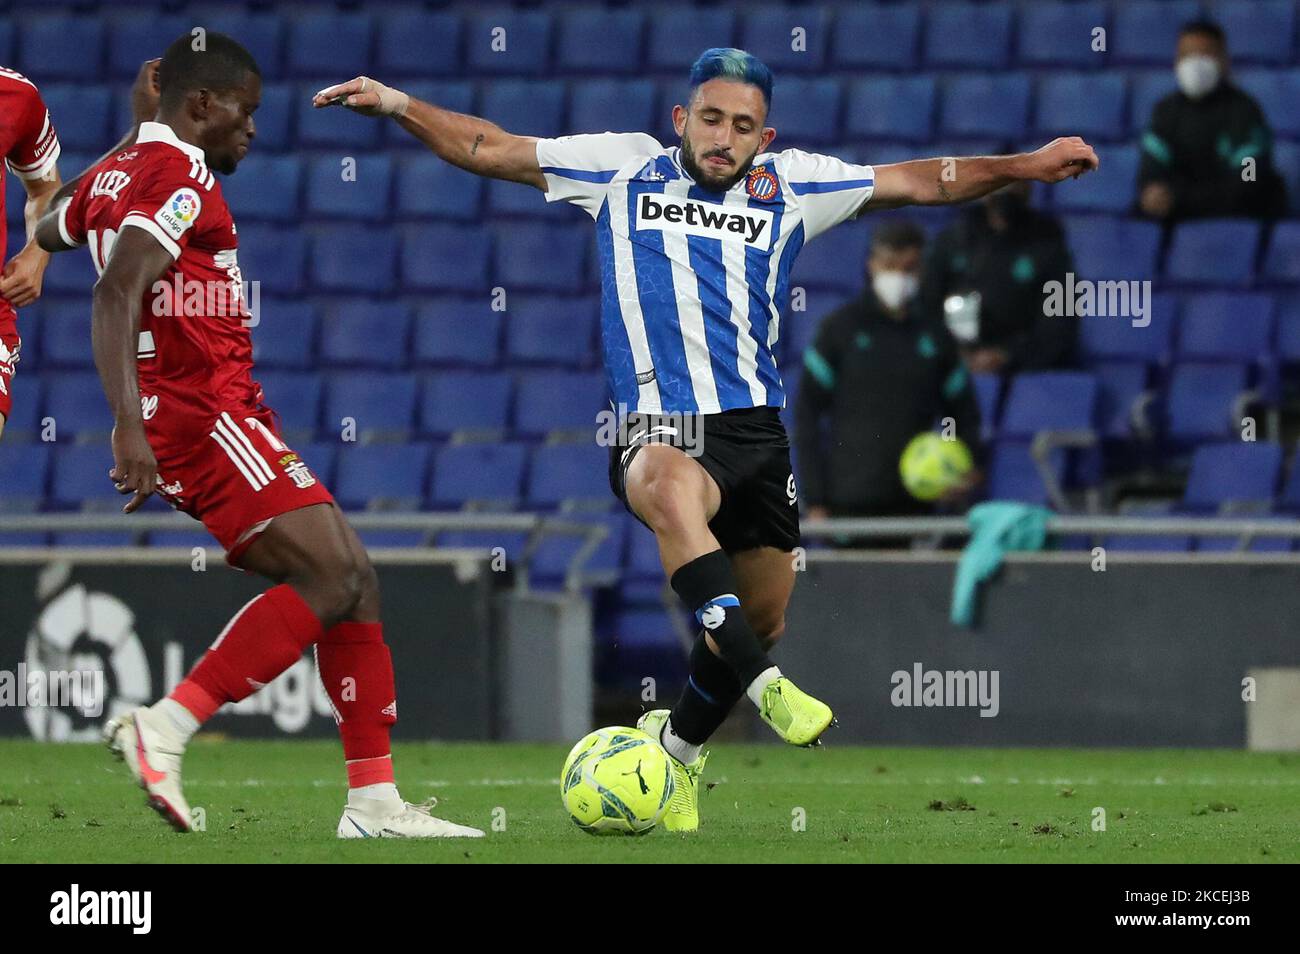 Matias Vargas and Ramon Azeez during the match between RCD Espanyol and FC Cartagena, corresponding to the week 39 of the Liga Smartbank, played at the RCDE Stadium on 14th May 2021, in Barcelona, Spain. (Photo by Joan Valls/Urbanandsport/NurPhoto) Stock Photo